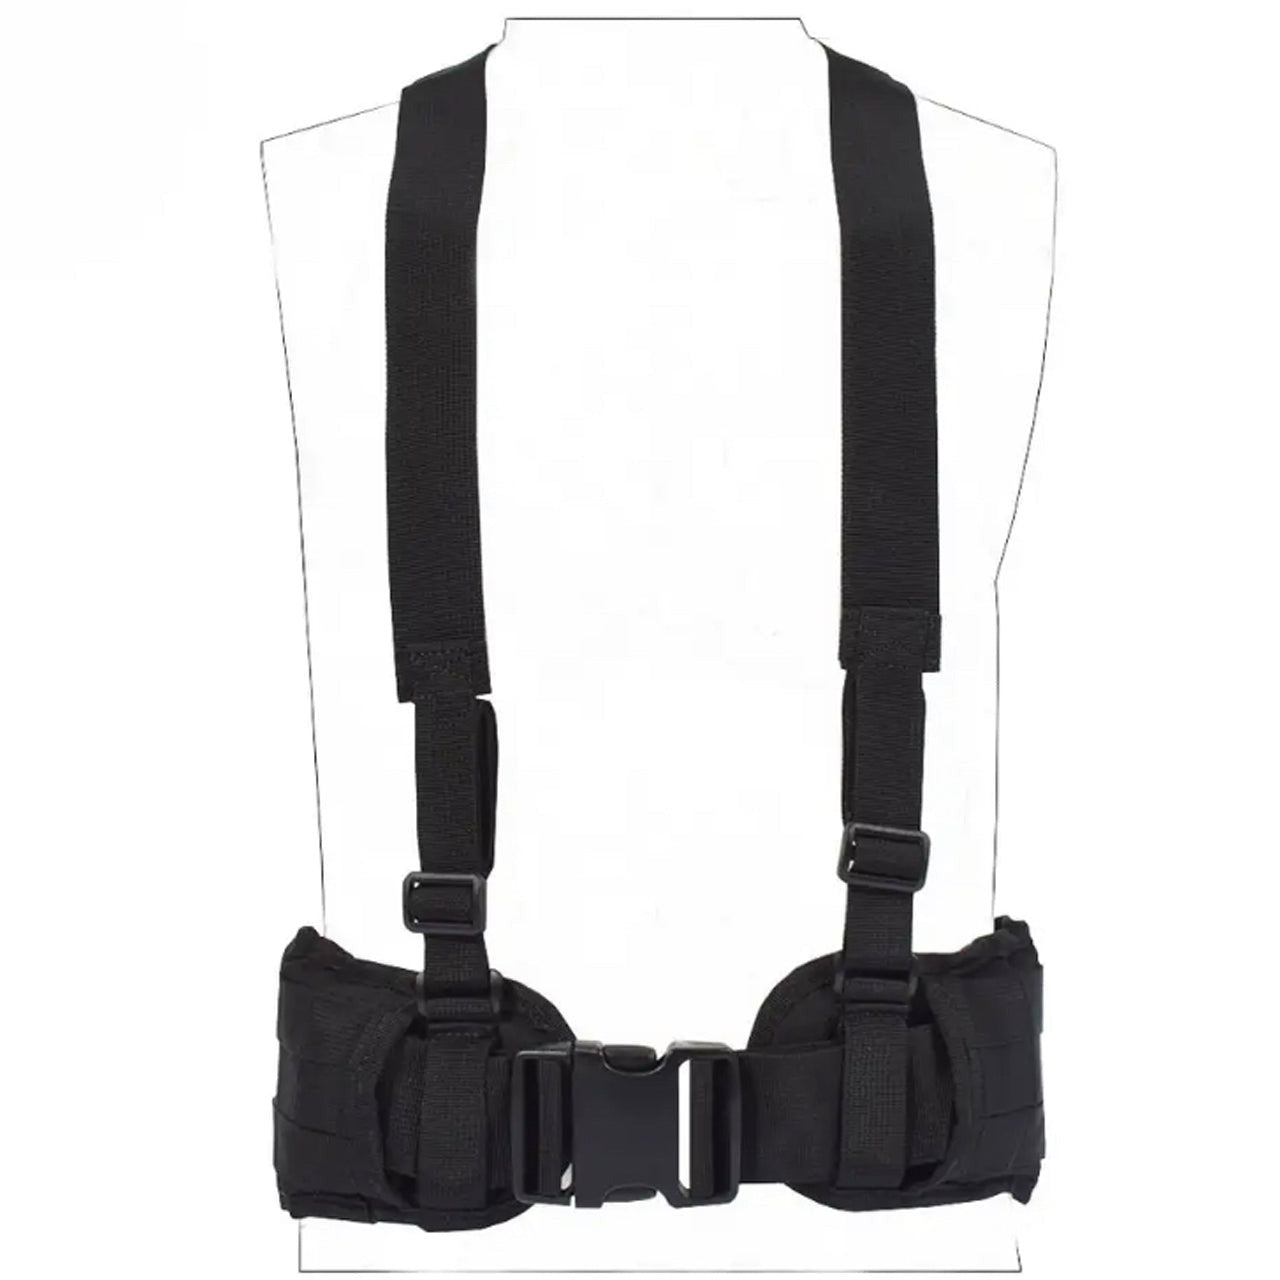 Boasting three rows of MOLLE-designed webbing straps for easy pouch attachment, the Cross Harness Platform is a lightweight, low-profile option with adjustable waist straps (34-64 inches) and easy-release, high-quality buckles. www.defenceqstore.com.au Black colour